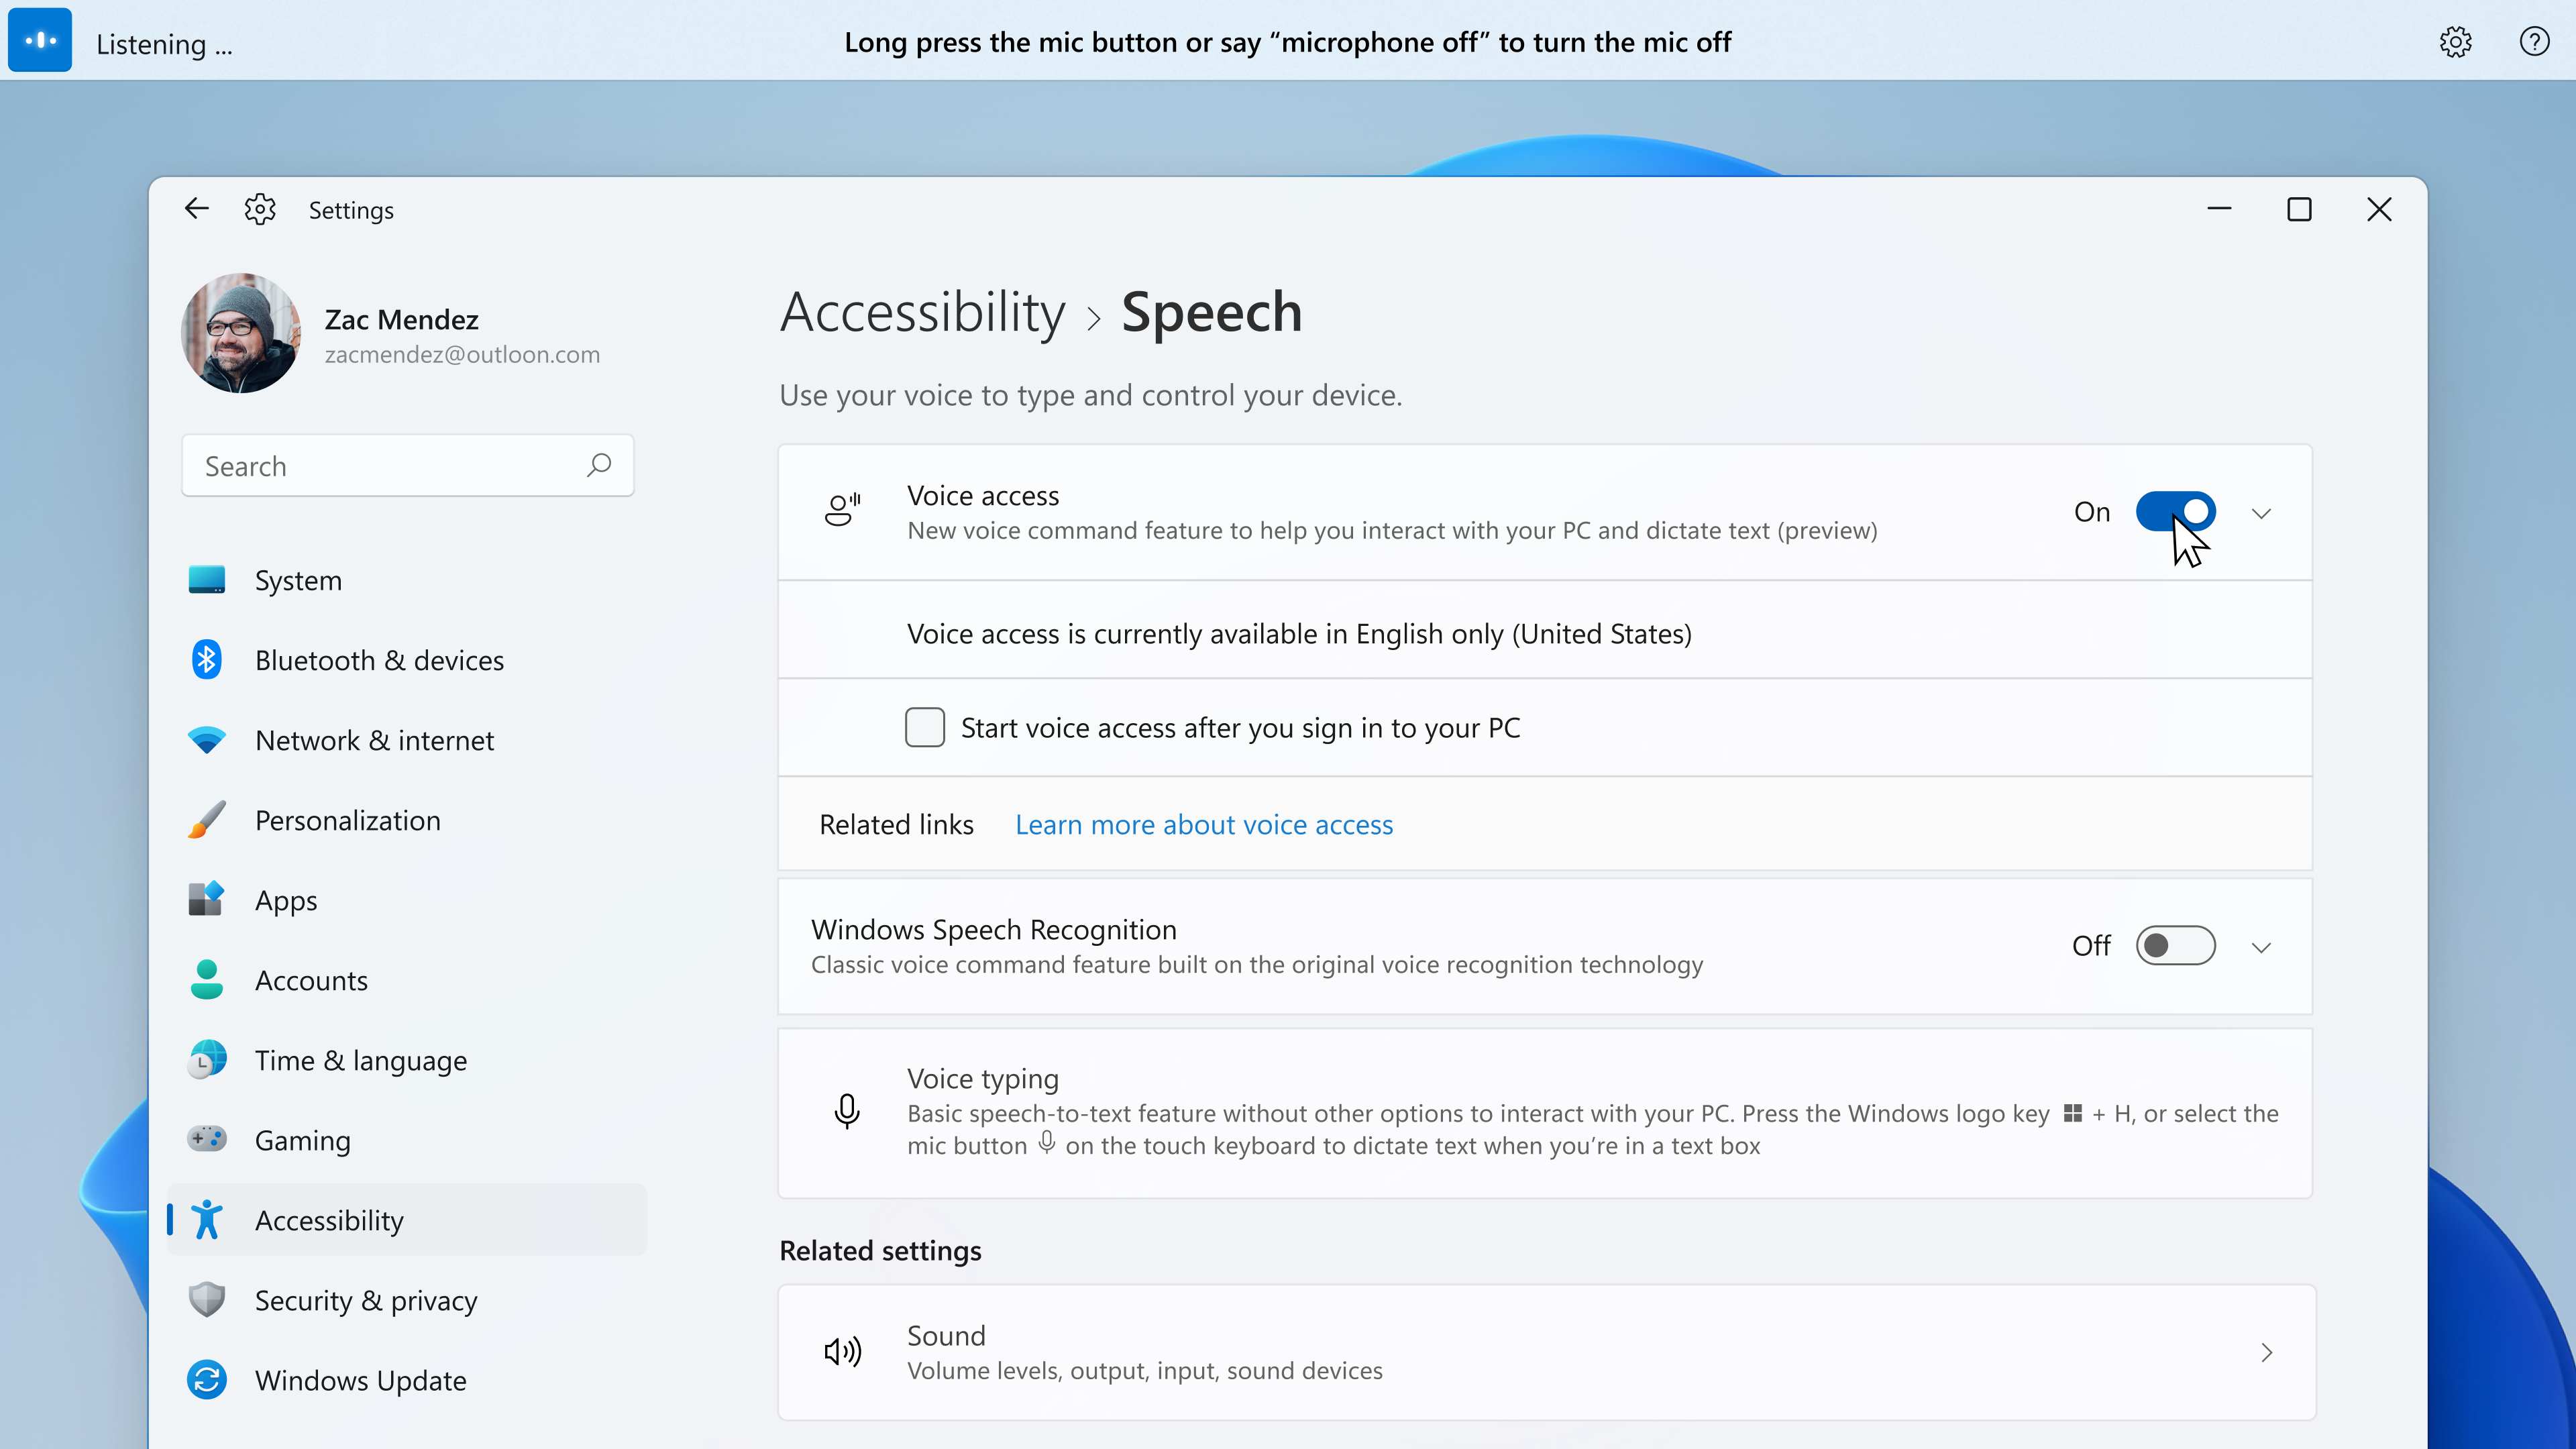 You can enable voice access under Settings > Accessibility > Speech.